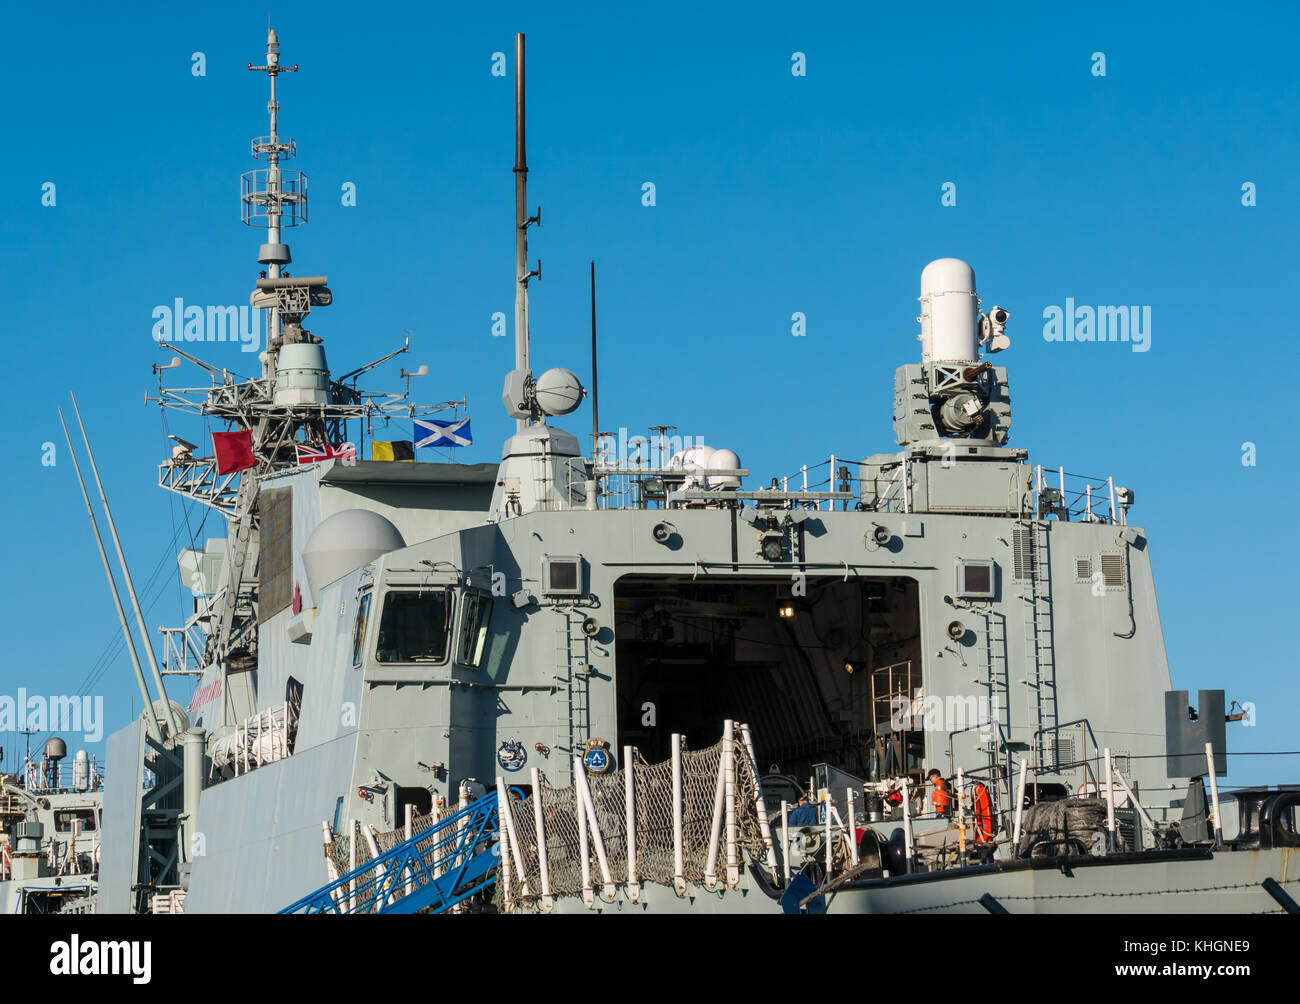 Entrance Basin, Leith Harbour, Edinburgh, Scotland, United Kingdom. 16th Nov, 2017. Montreal is a Halifax Class frigate in the Canadian Navy serving as part of the Standing Naval Force Atlantic (STANAVFORLANT),  on a courtesy visit to Scotland and flying the Union Jack and Saltire flags on a sunny blue sky Autumn day Stock Photo